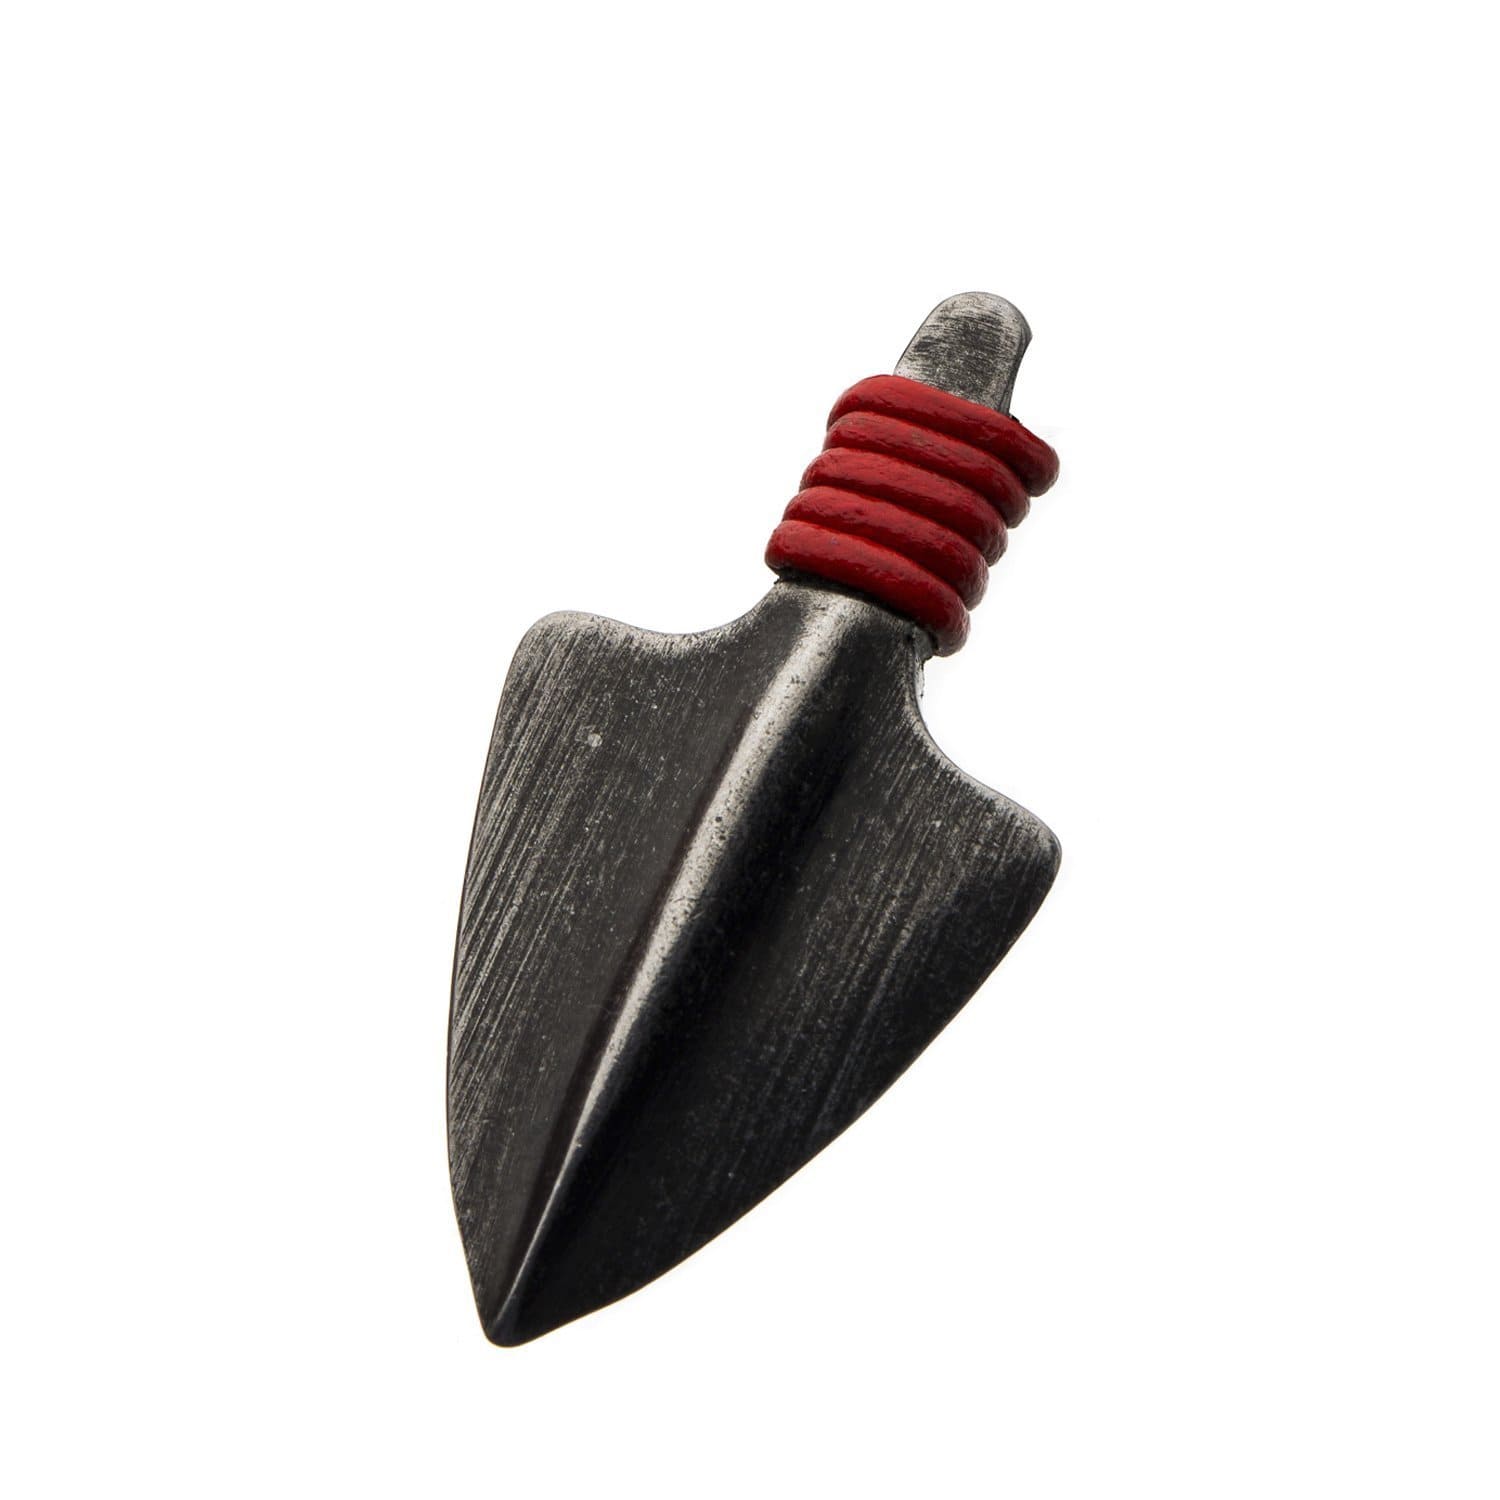 INOX JEWELRY Pendants Stainless Steel Oxidized Finish Gunmetal Silver Tone with Red Leather Cord Arrowhead Pendant SSPN008ASNK1